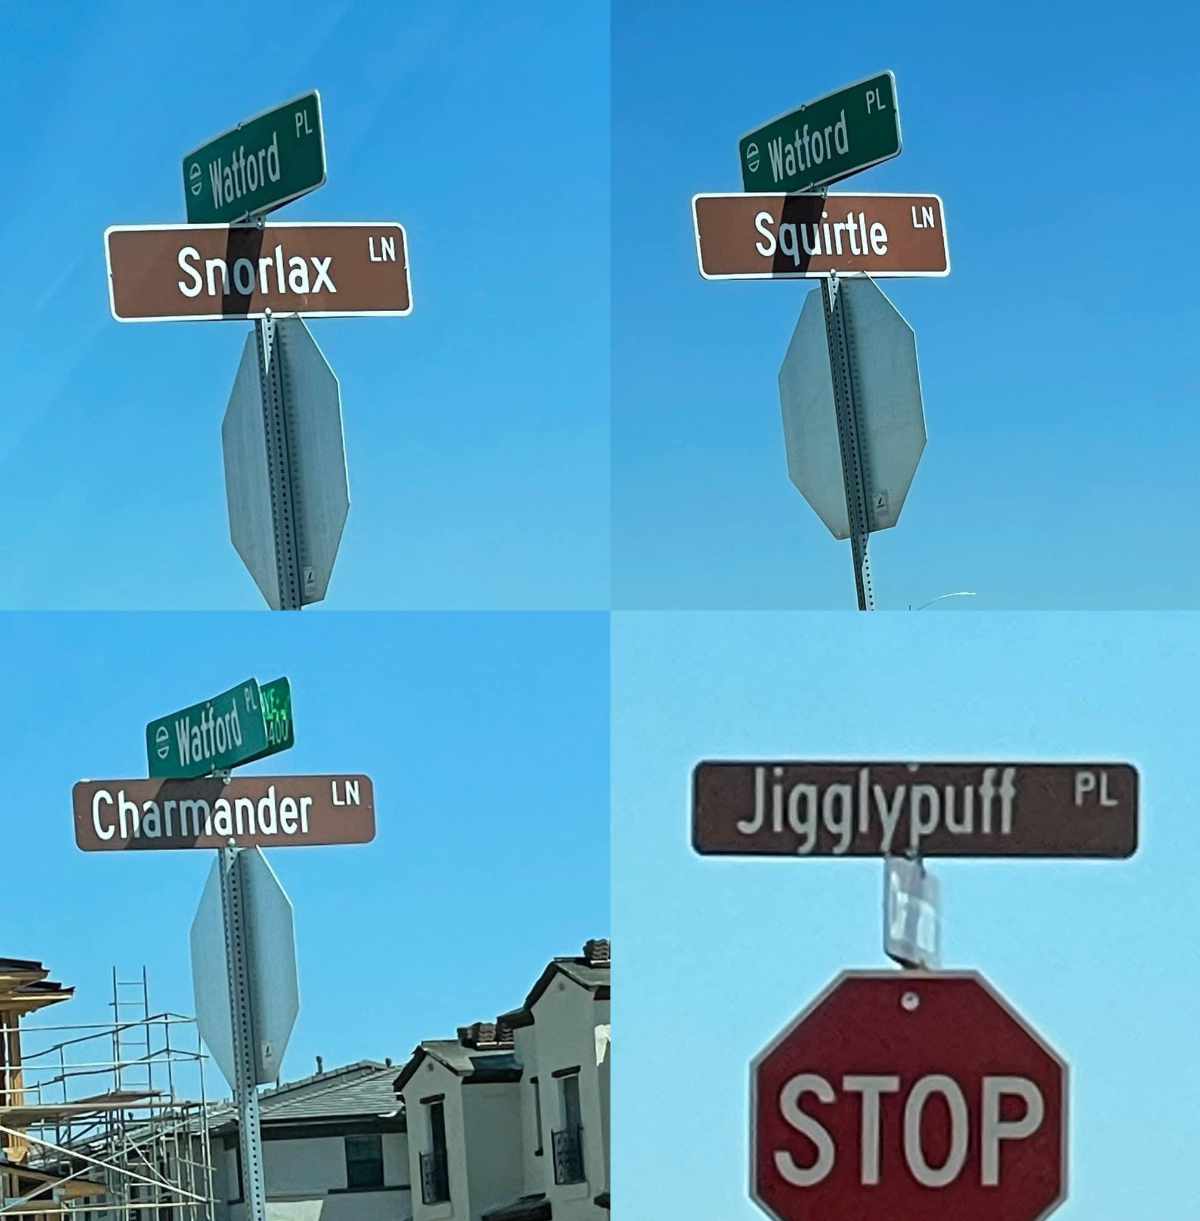 These street names in a new suburb development in Las Vegas